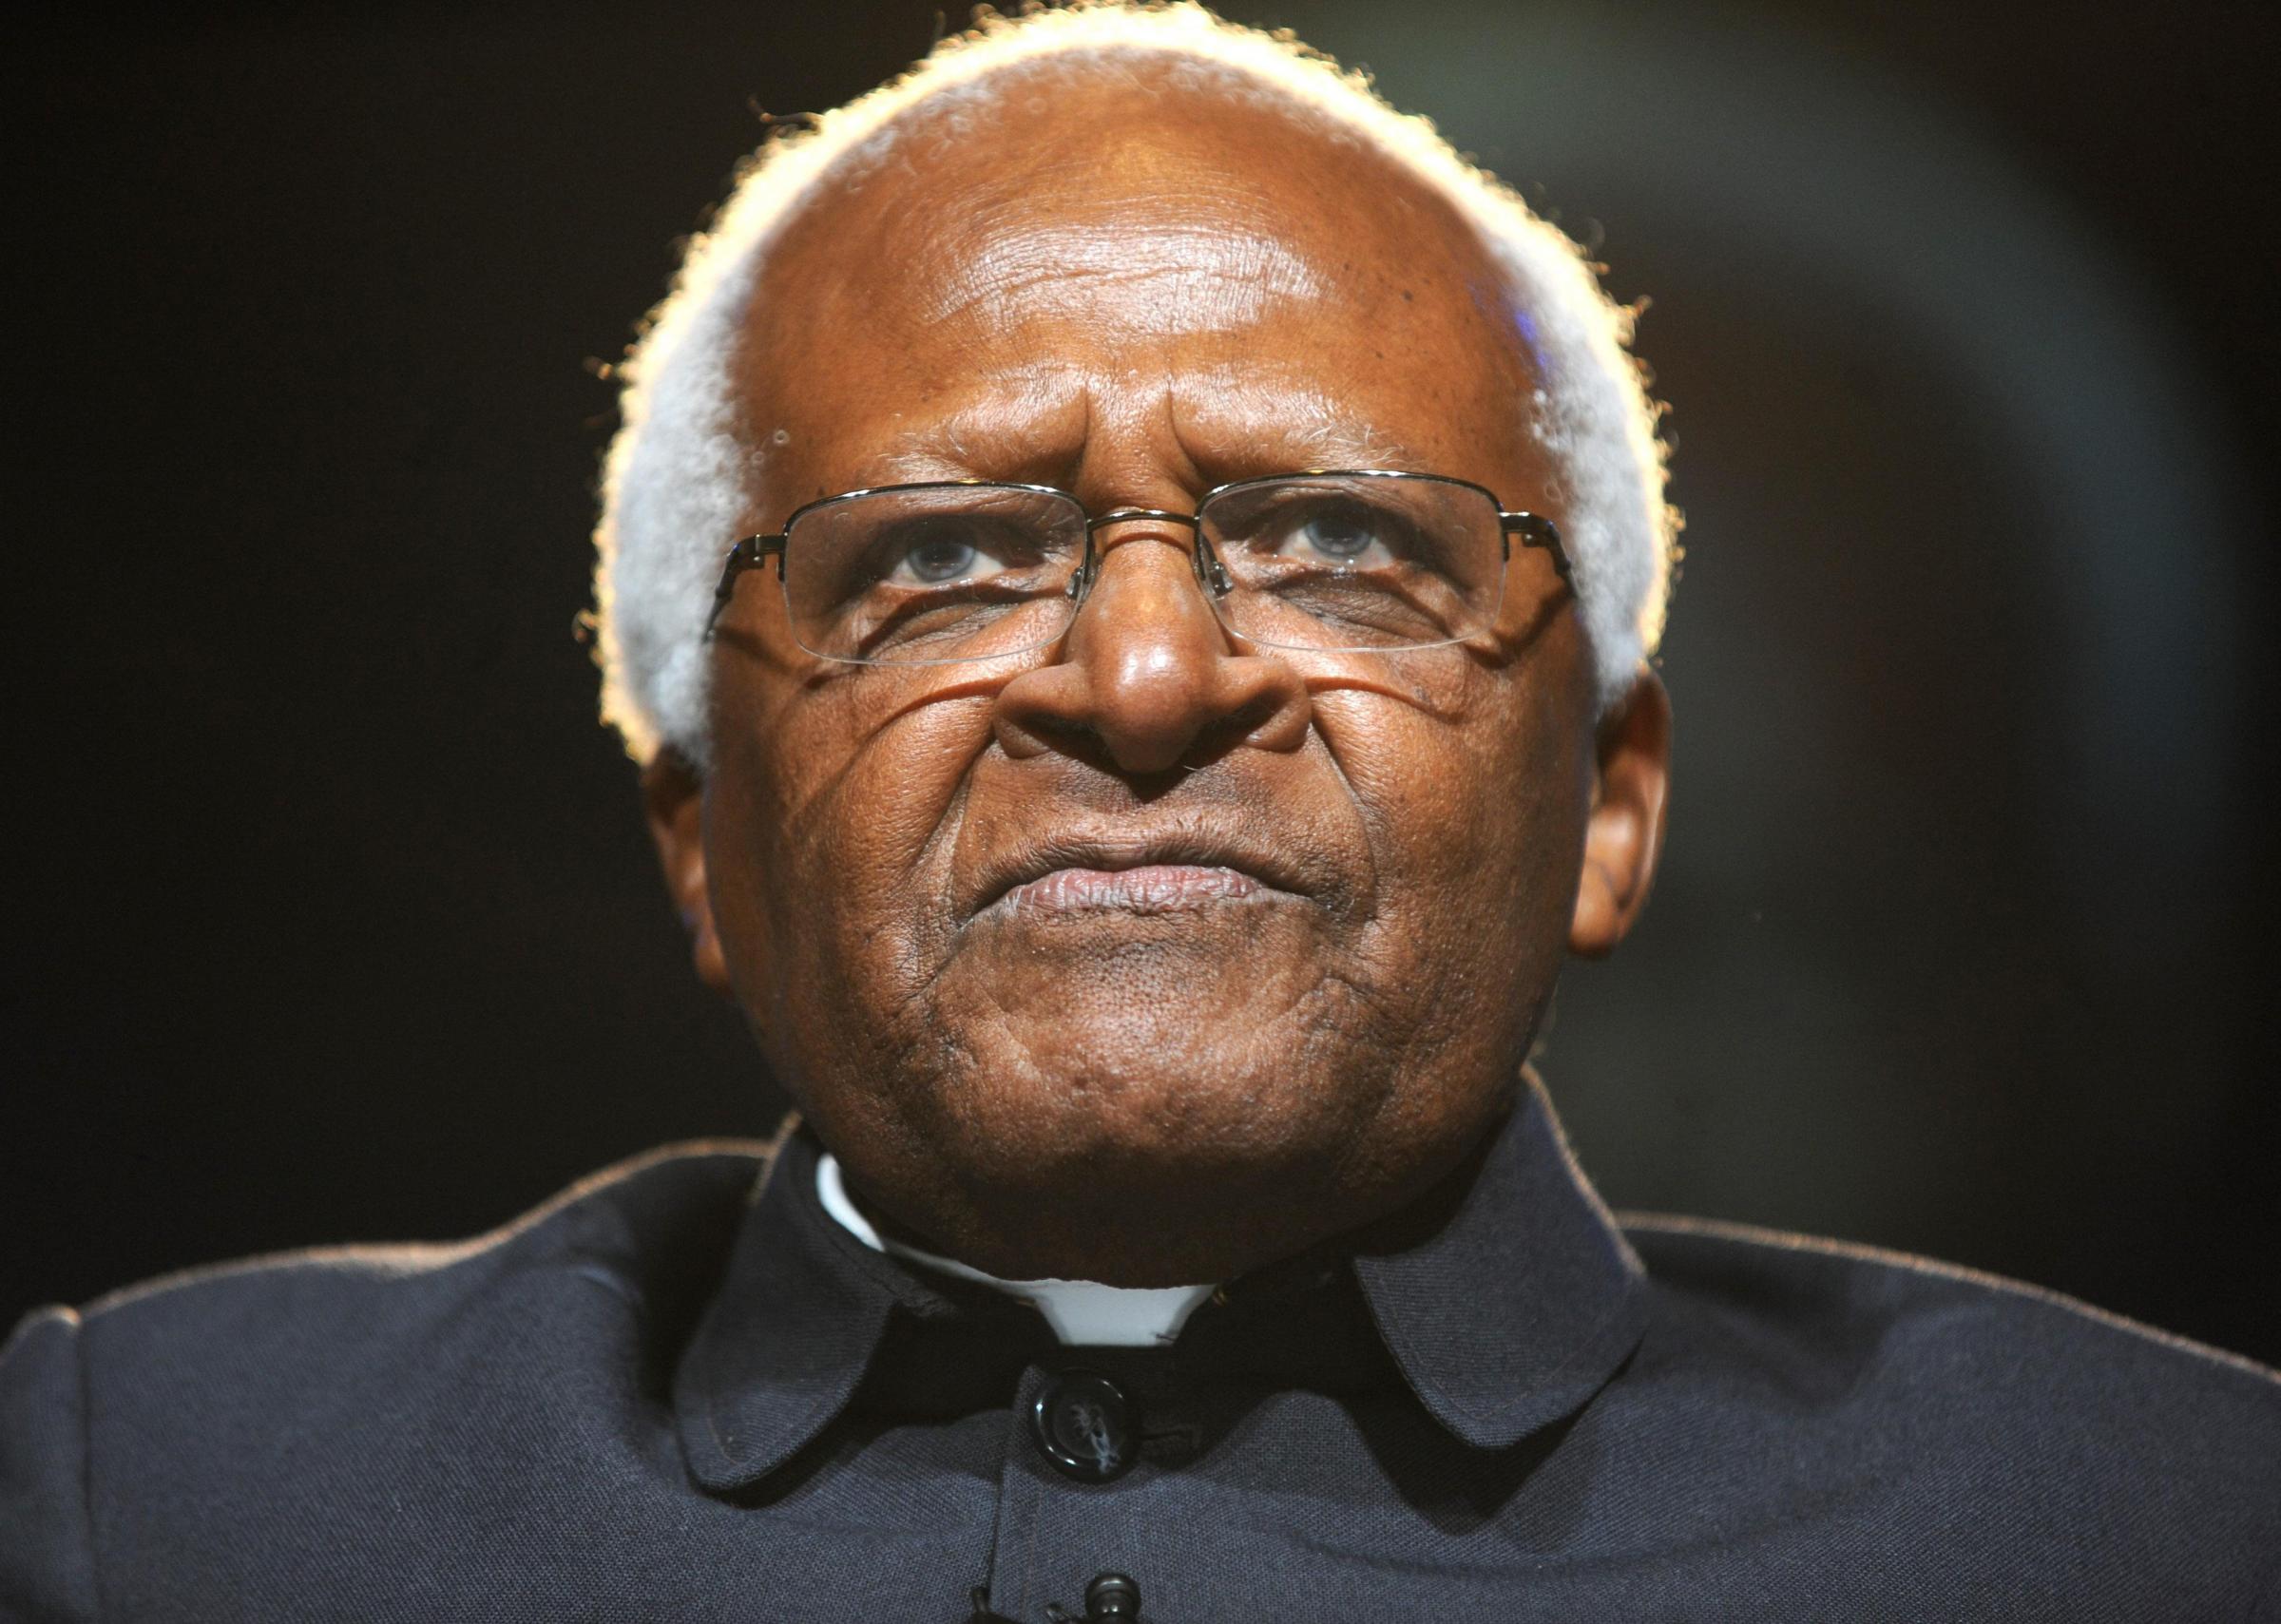 File photo of Archbishop Desmond Tutu speaking during the One Young World Summit ceremony at Old Billingsgate, London, in 2010. Picture: Zak Hussein/PA Wire.